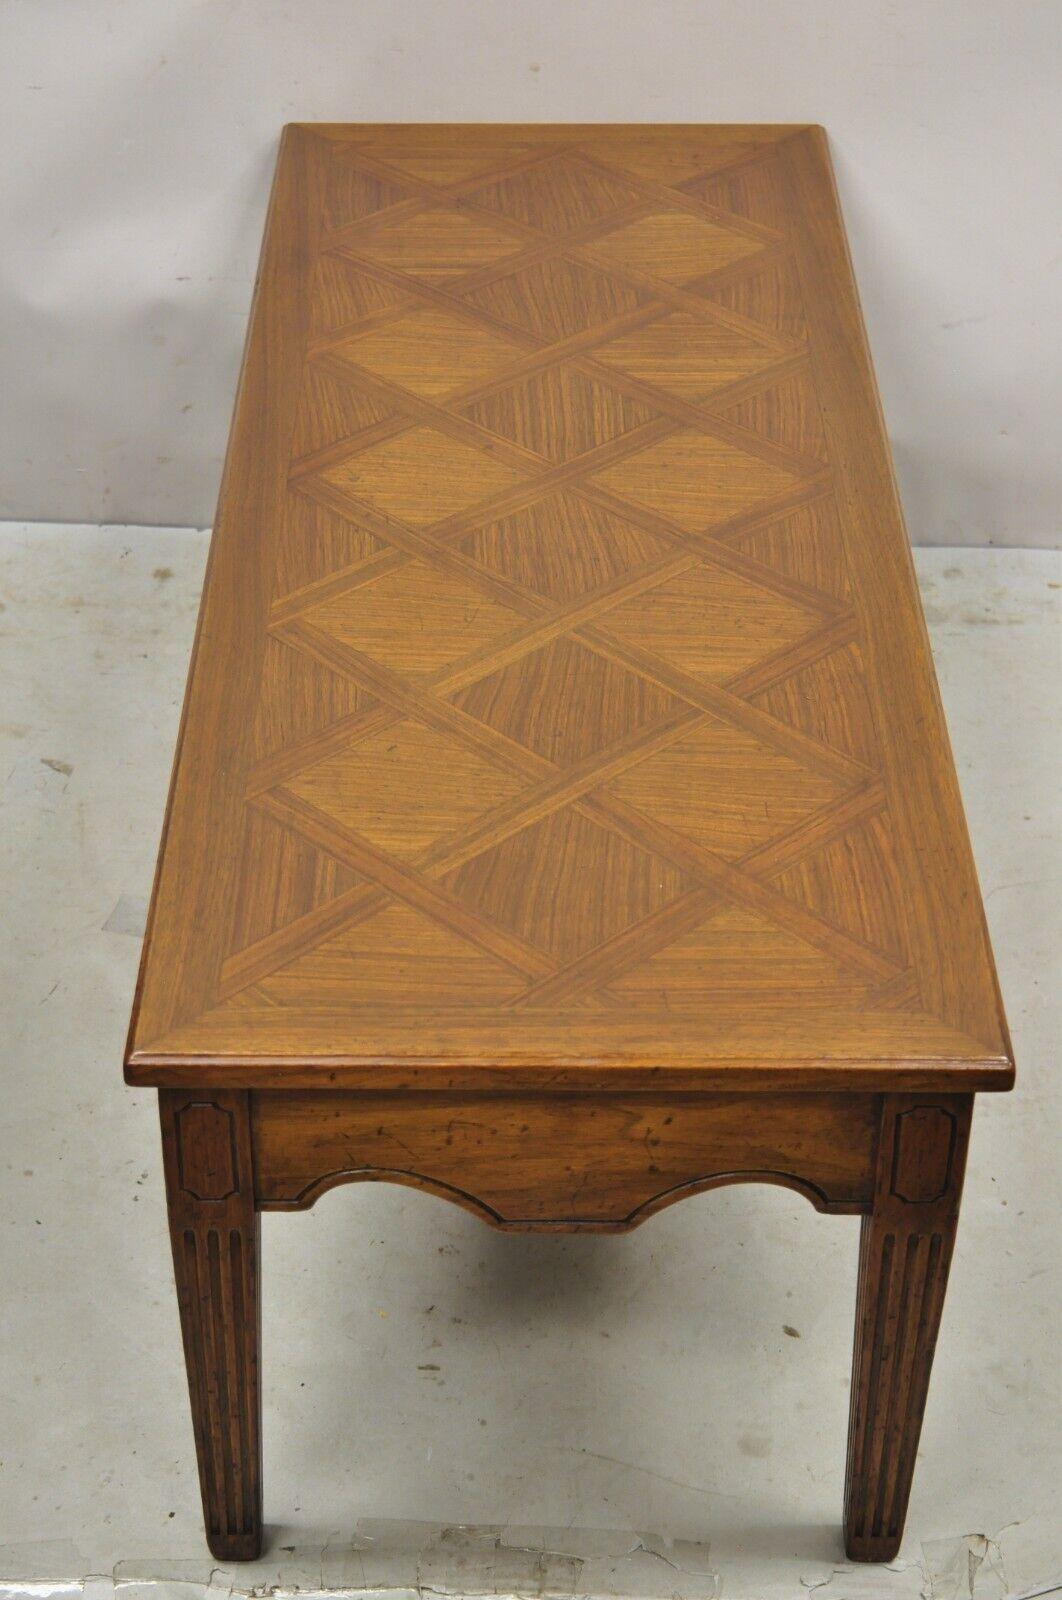 Vintage Italian Provincial Walnut French Country Parquetry Inlay Coffee Table. Item features a solid wood construction, parquetry inlay top, distressed finish, quality Italian craftsmanship. Circa Mid 20th Century. Measurements: 16